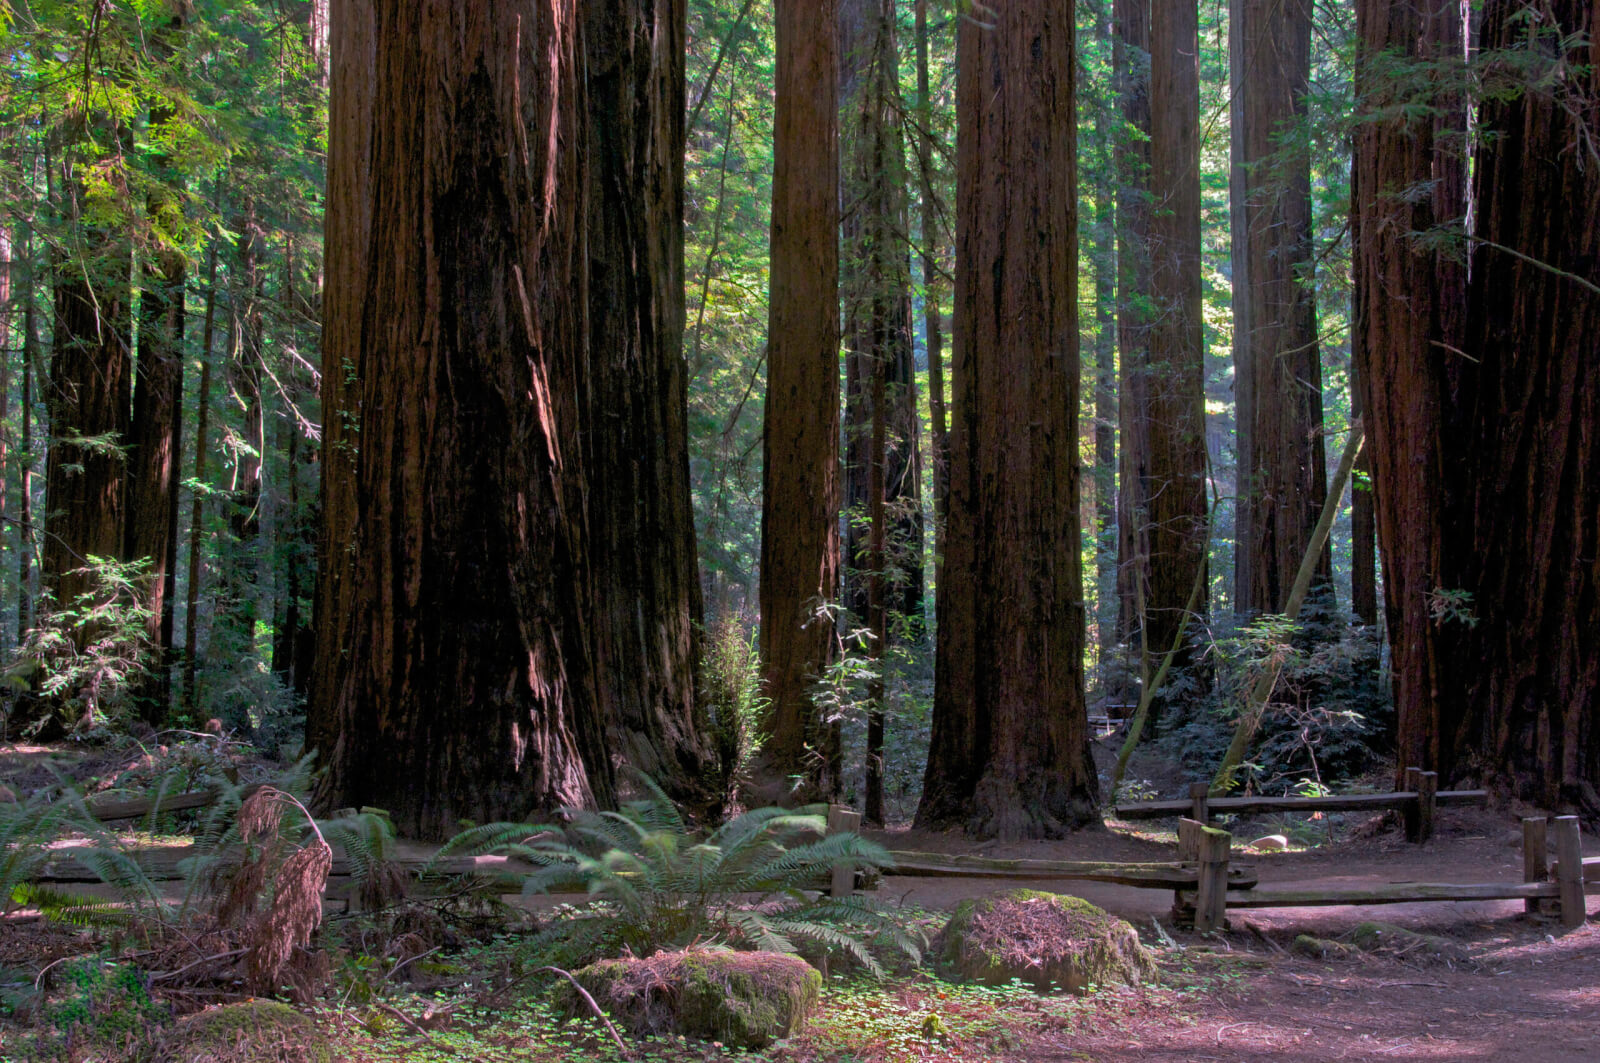 Armstrong Redwoods State Natural Reserve in Guerneville